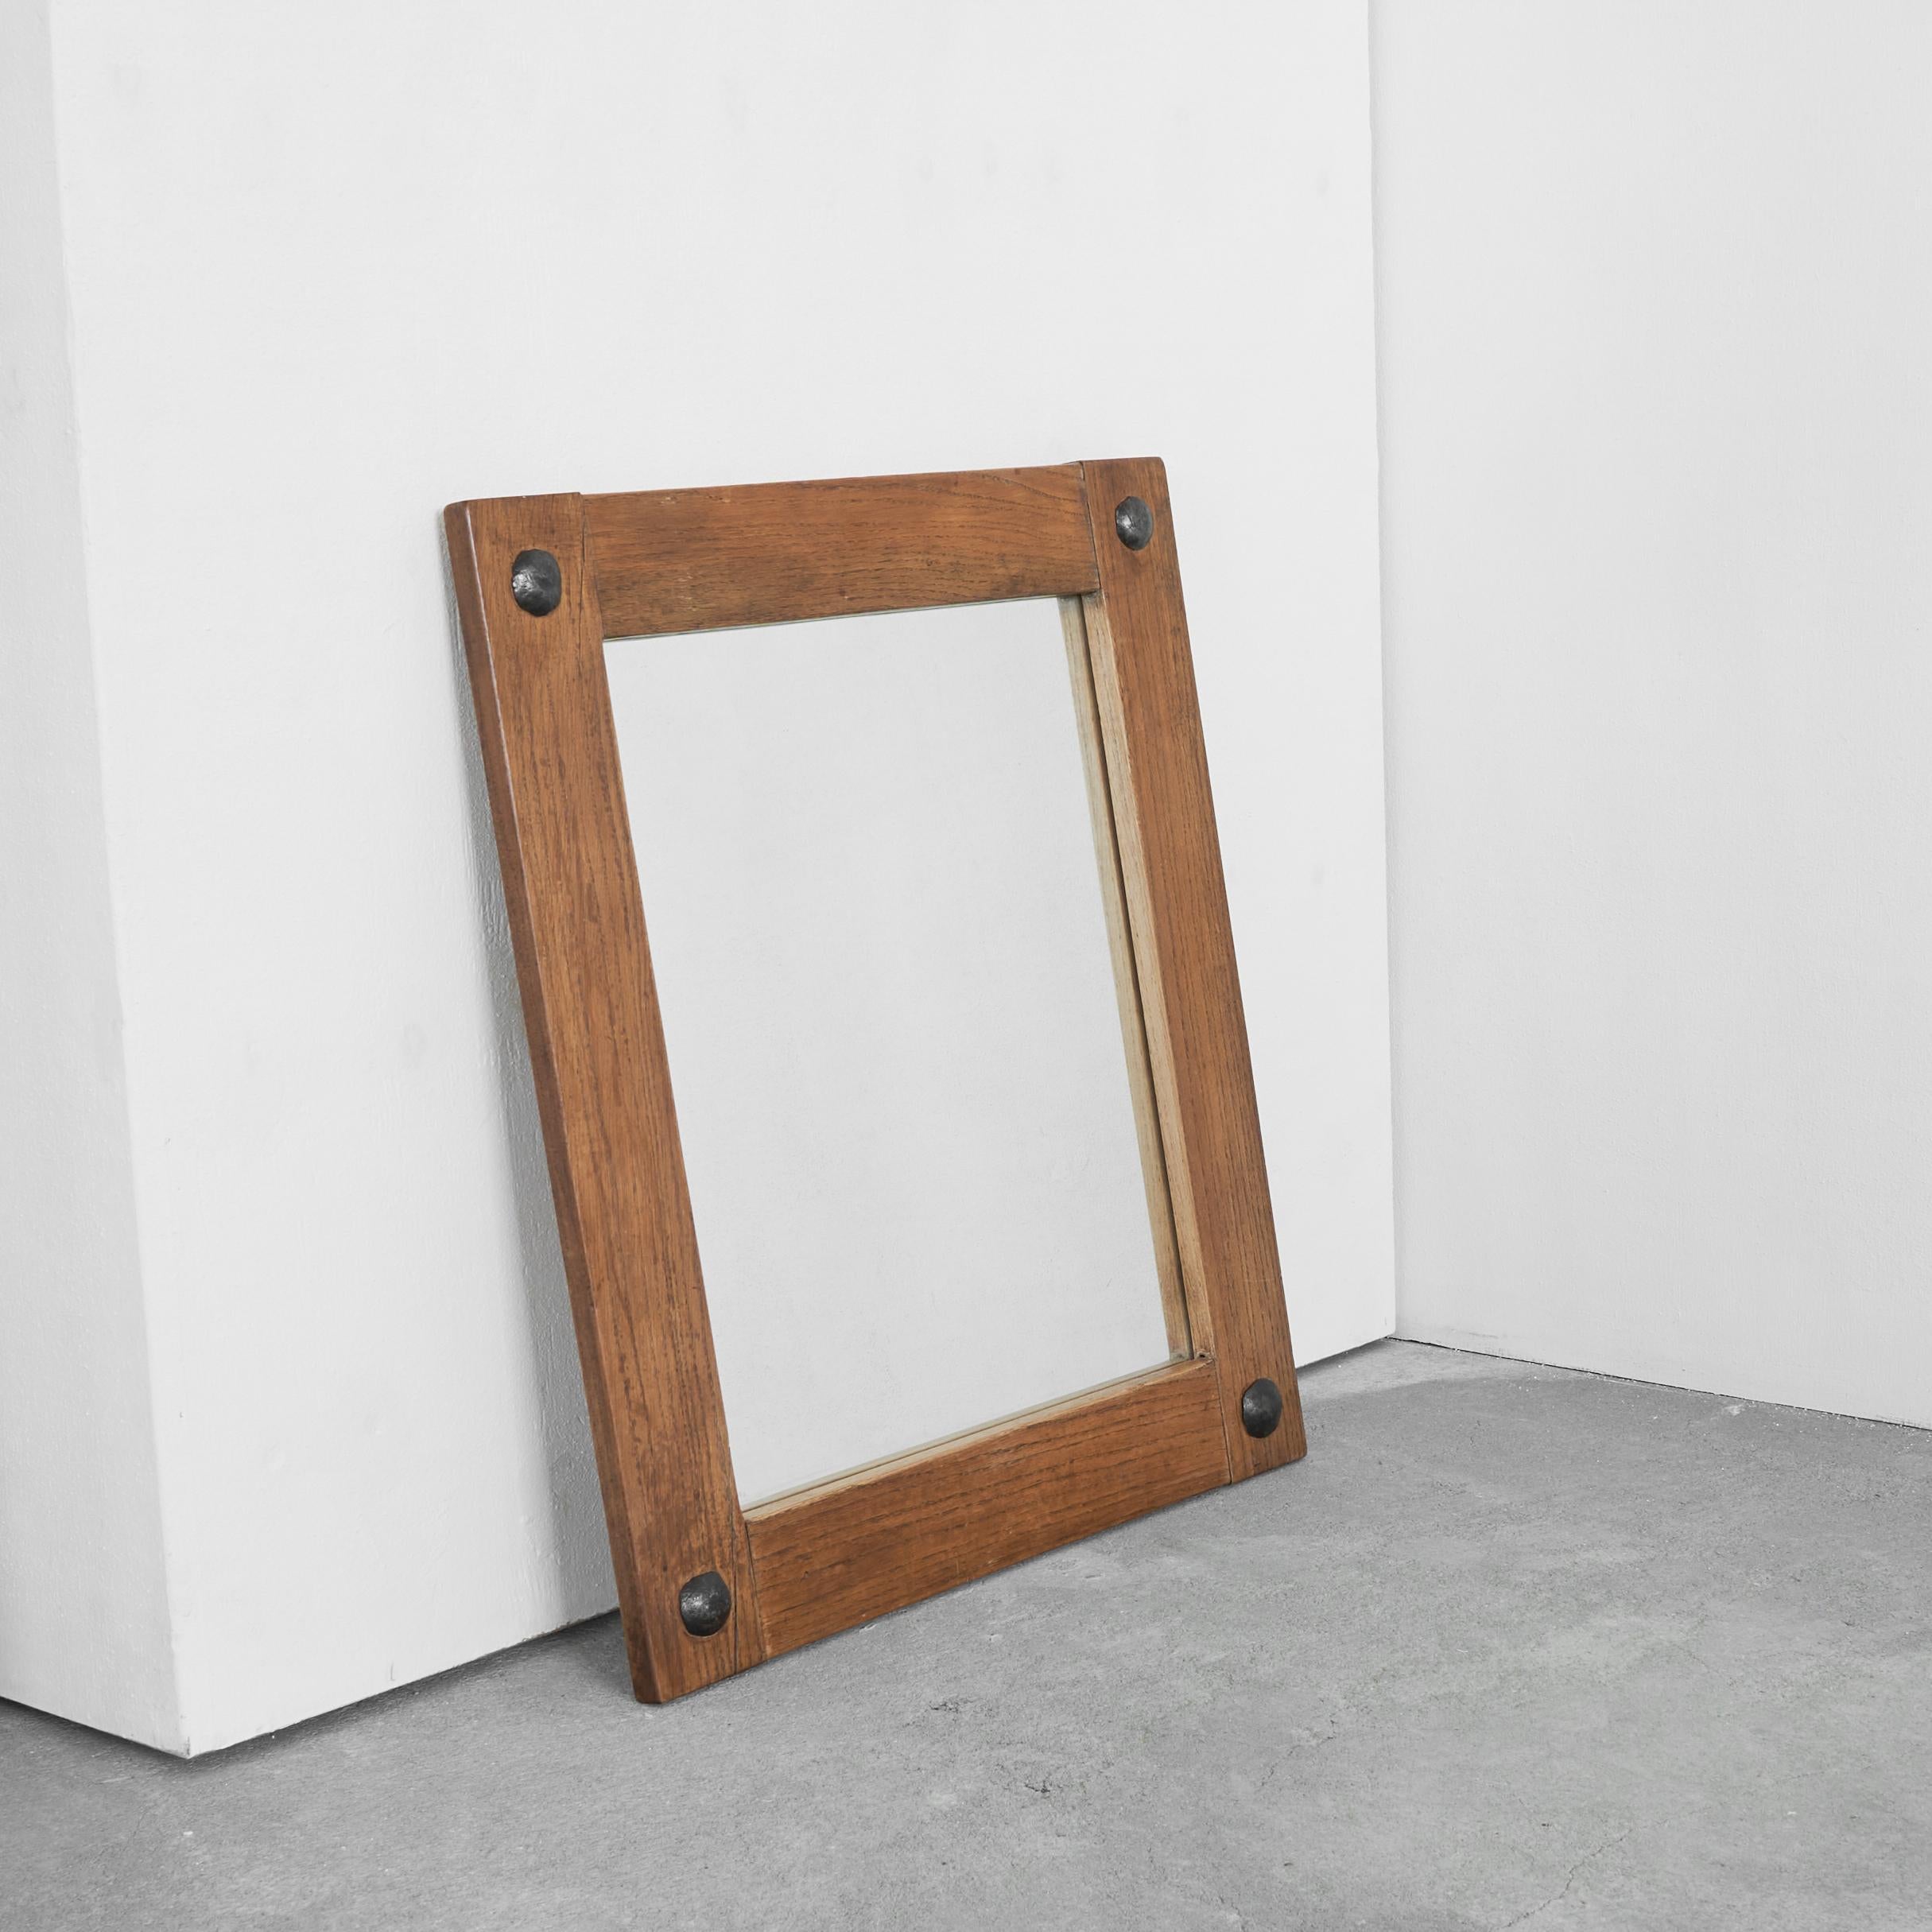 Brutalist Mirror in Solid Oak and Metal 1970s.

Beautiful simple mid-century mirror in solid oak with metal nails. Timeless and elegant, this mirror suits many interior styles. The combination of the solid oak and the metal nails is wonderfully